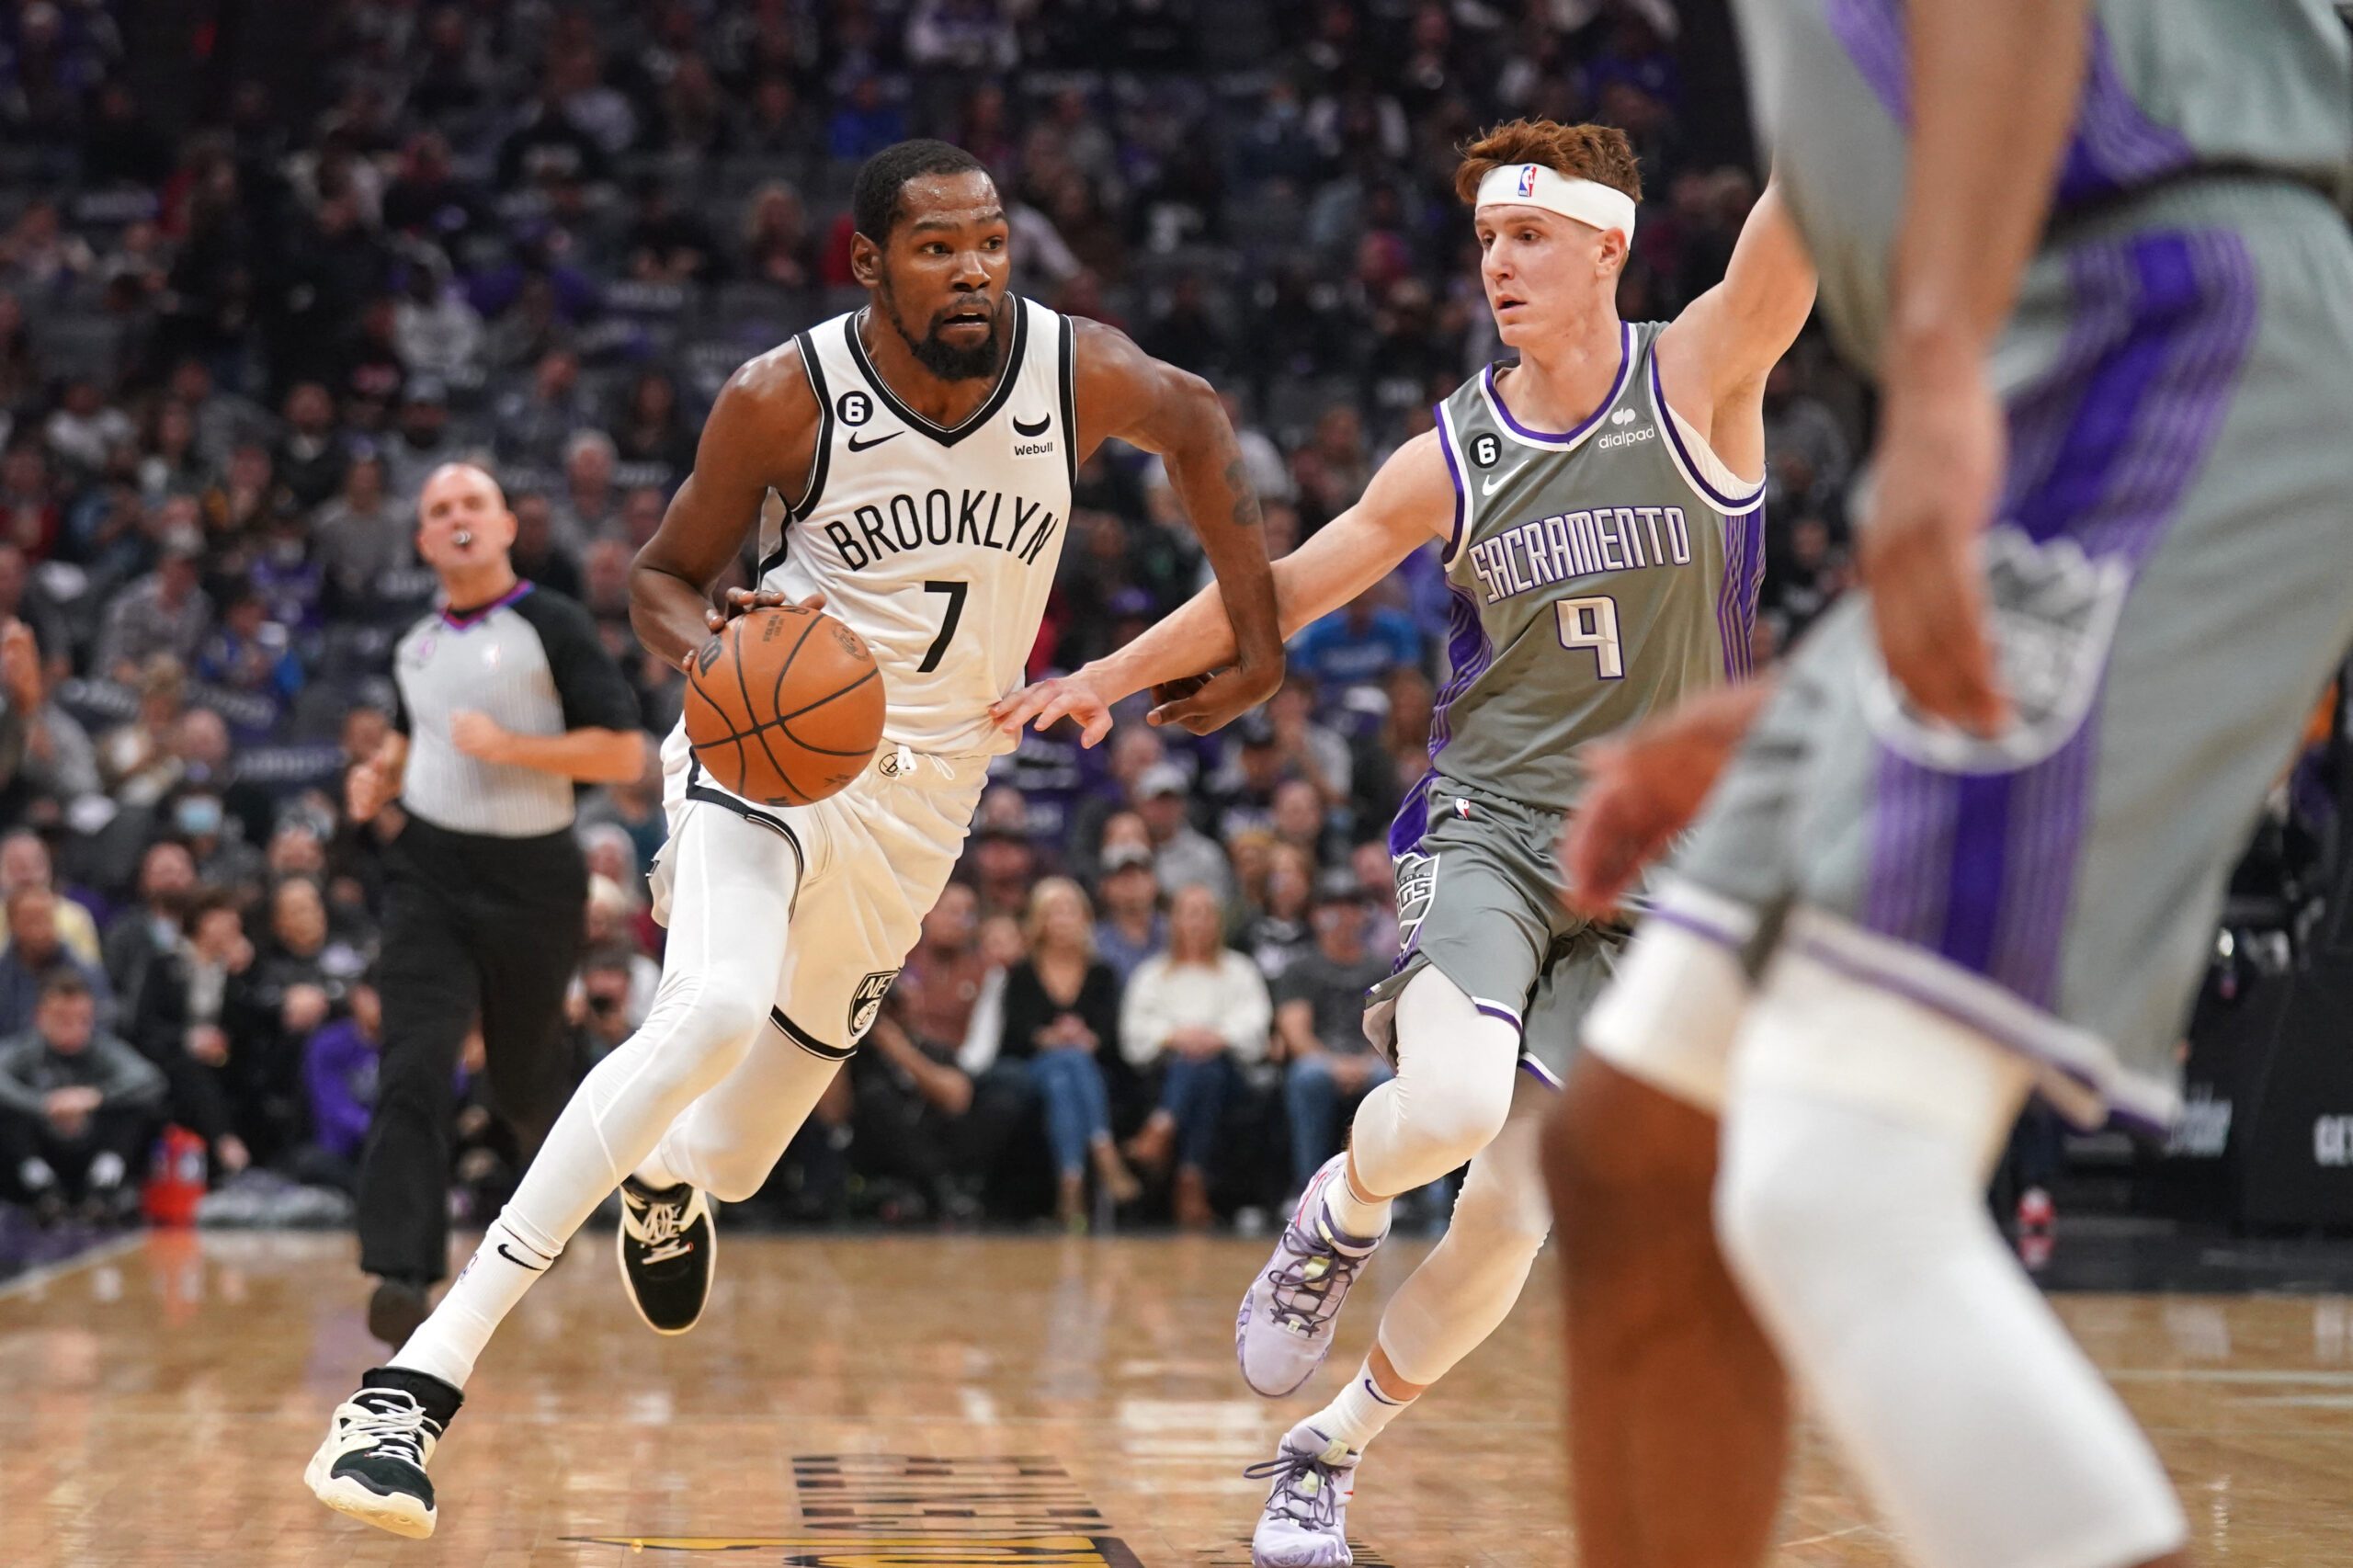 Kings hang 153 points in rout of Durant, Nets